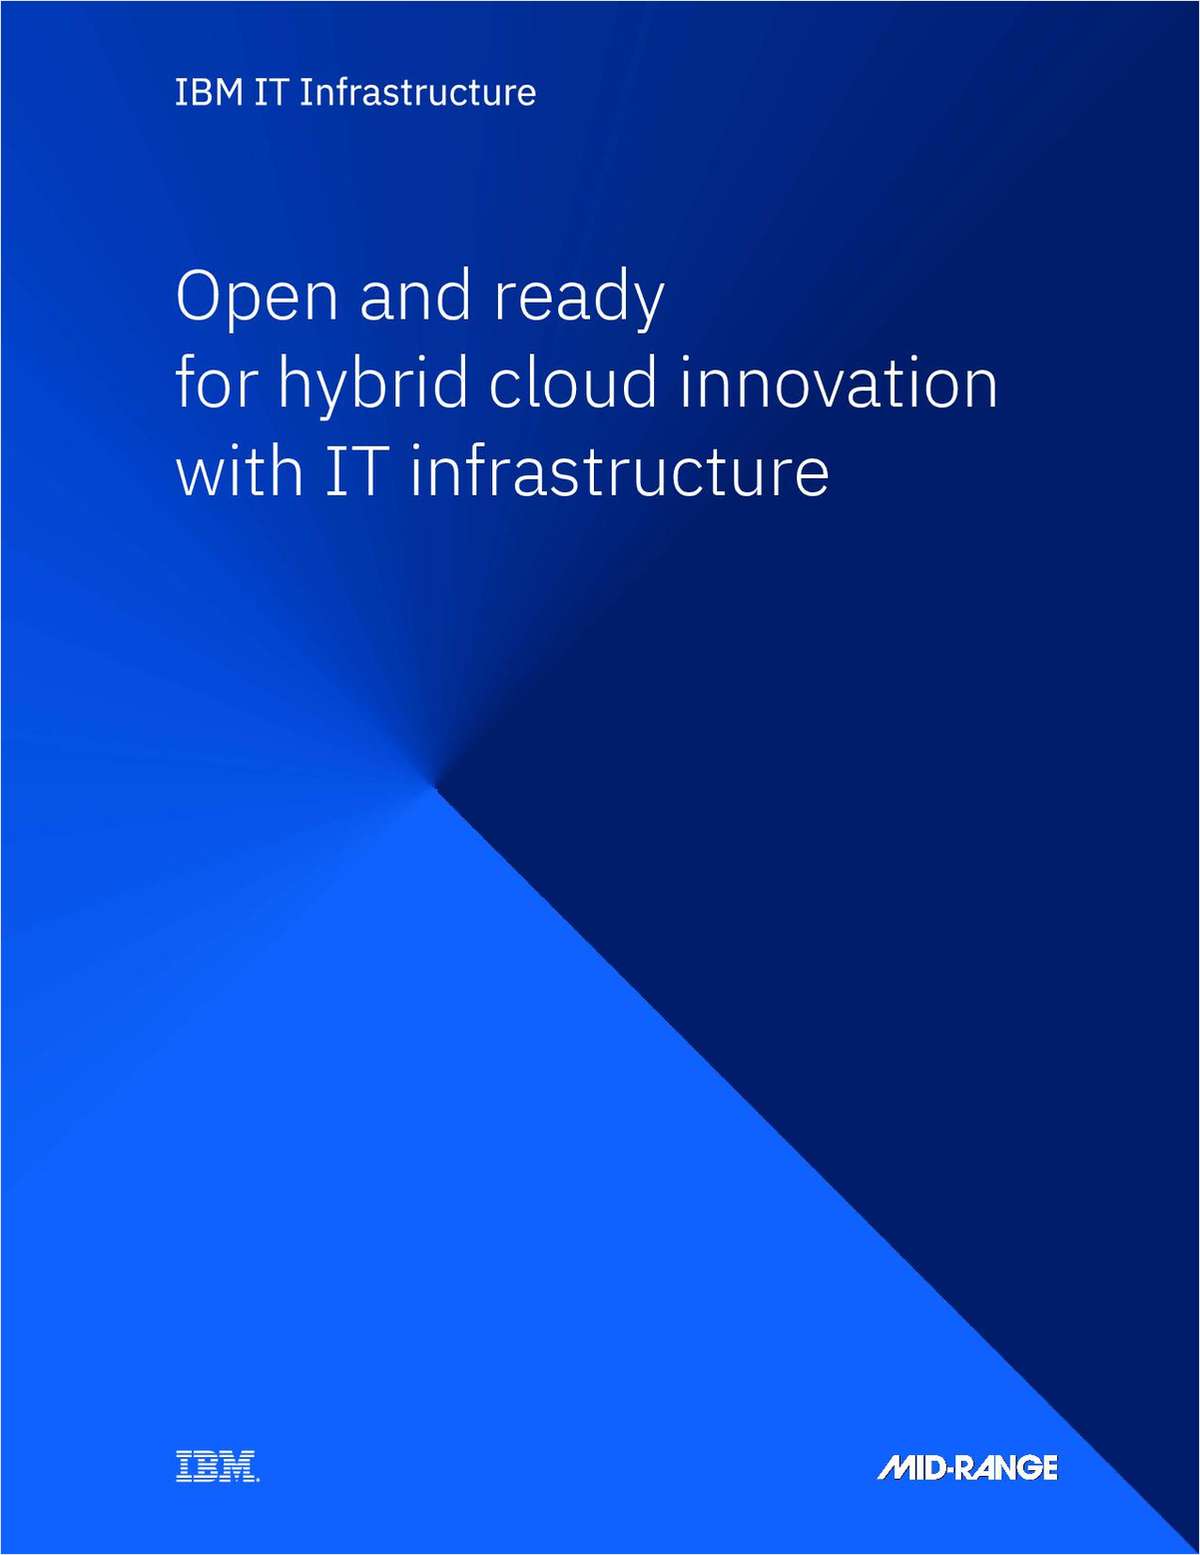 Open and ready for hybrid cloud innovation with IT infrastructure